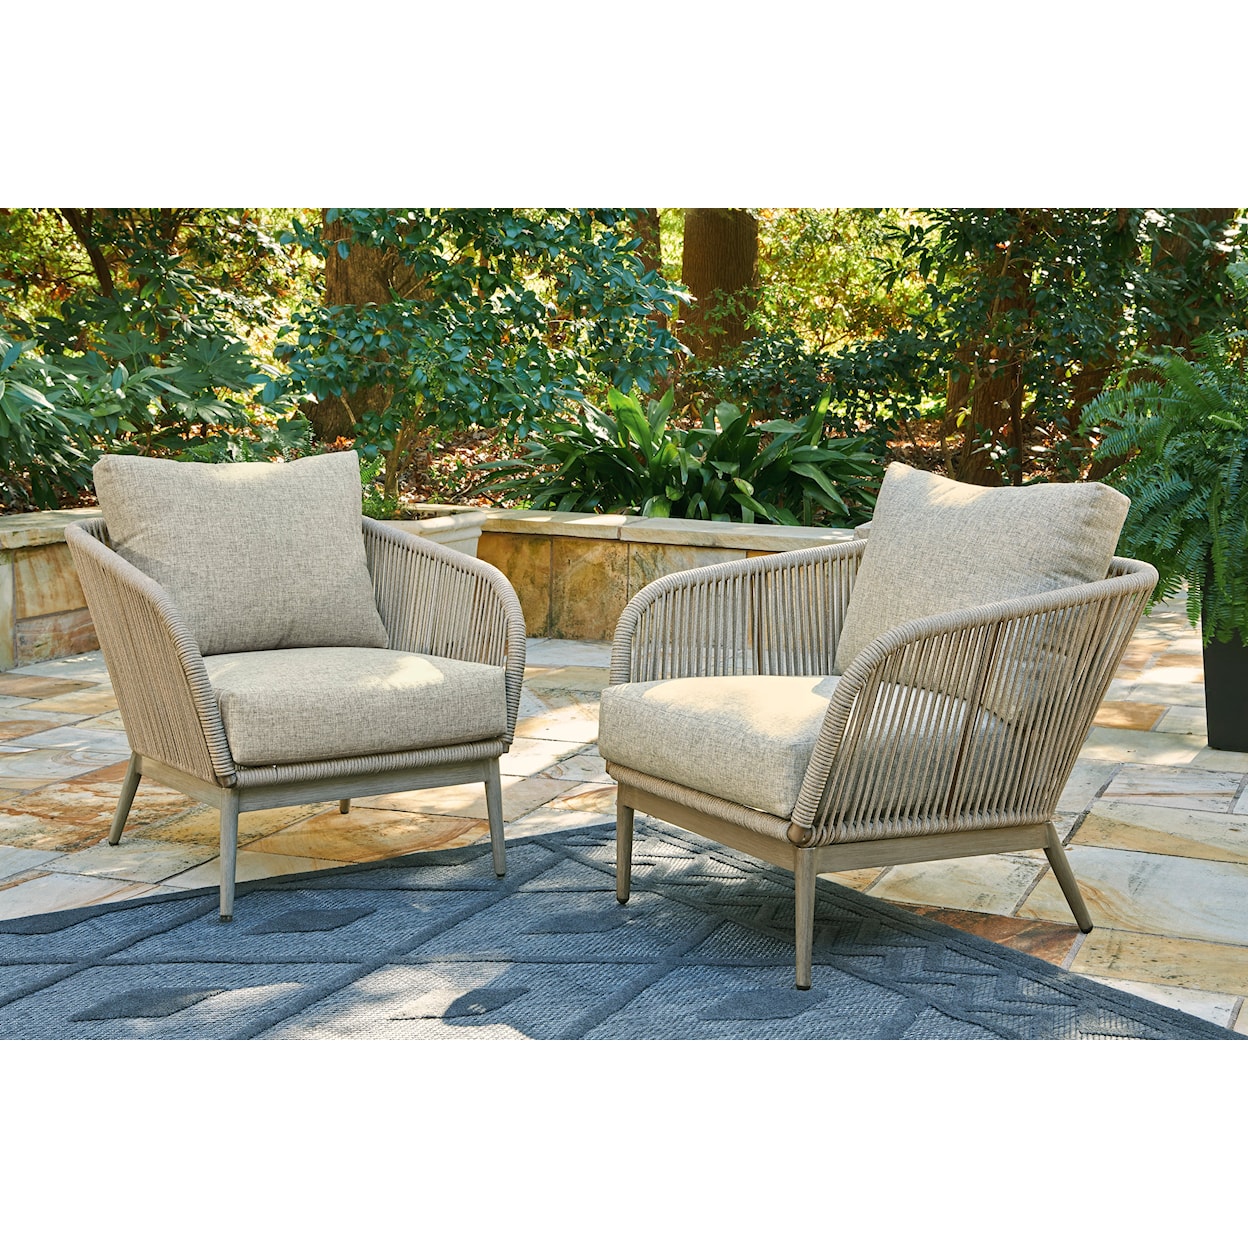 Signature Design by Ashley Swiss Valley Outdoor Chair (Set of 2)